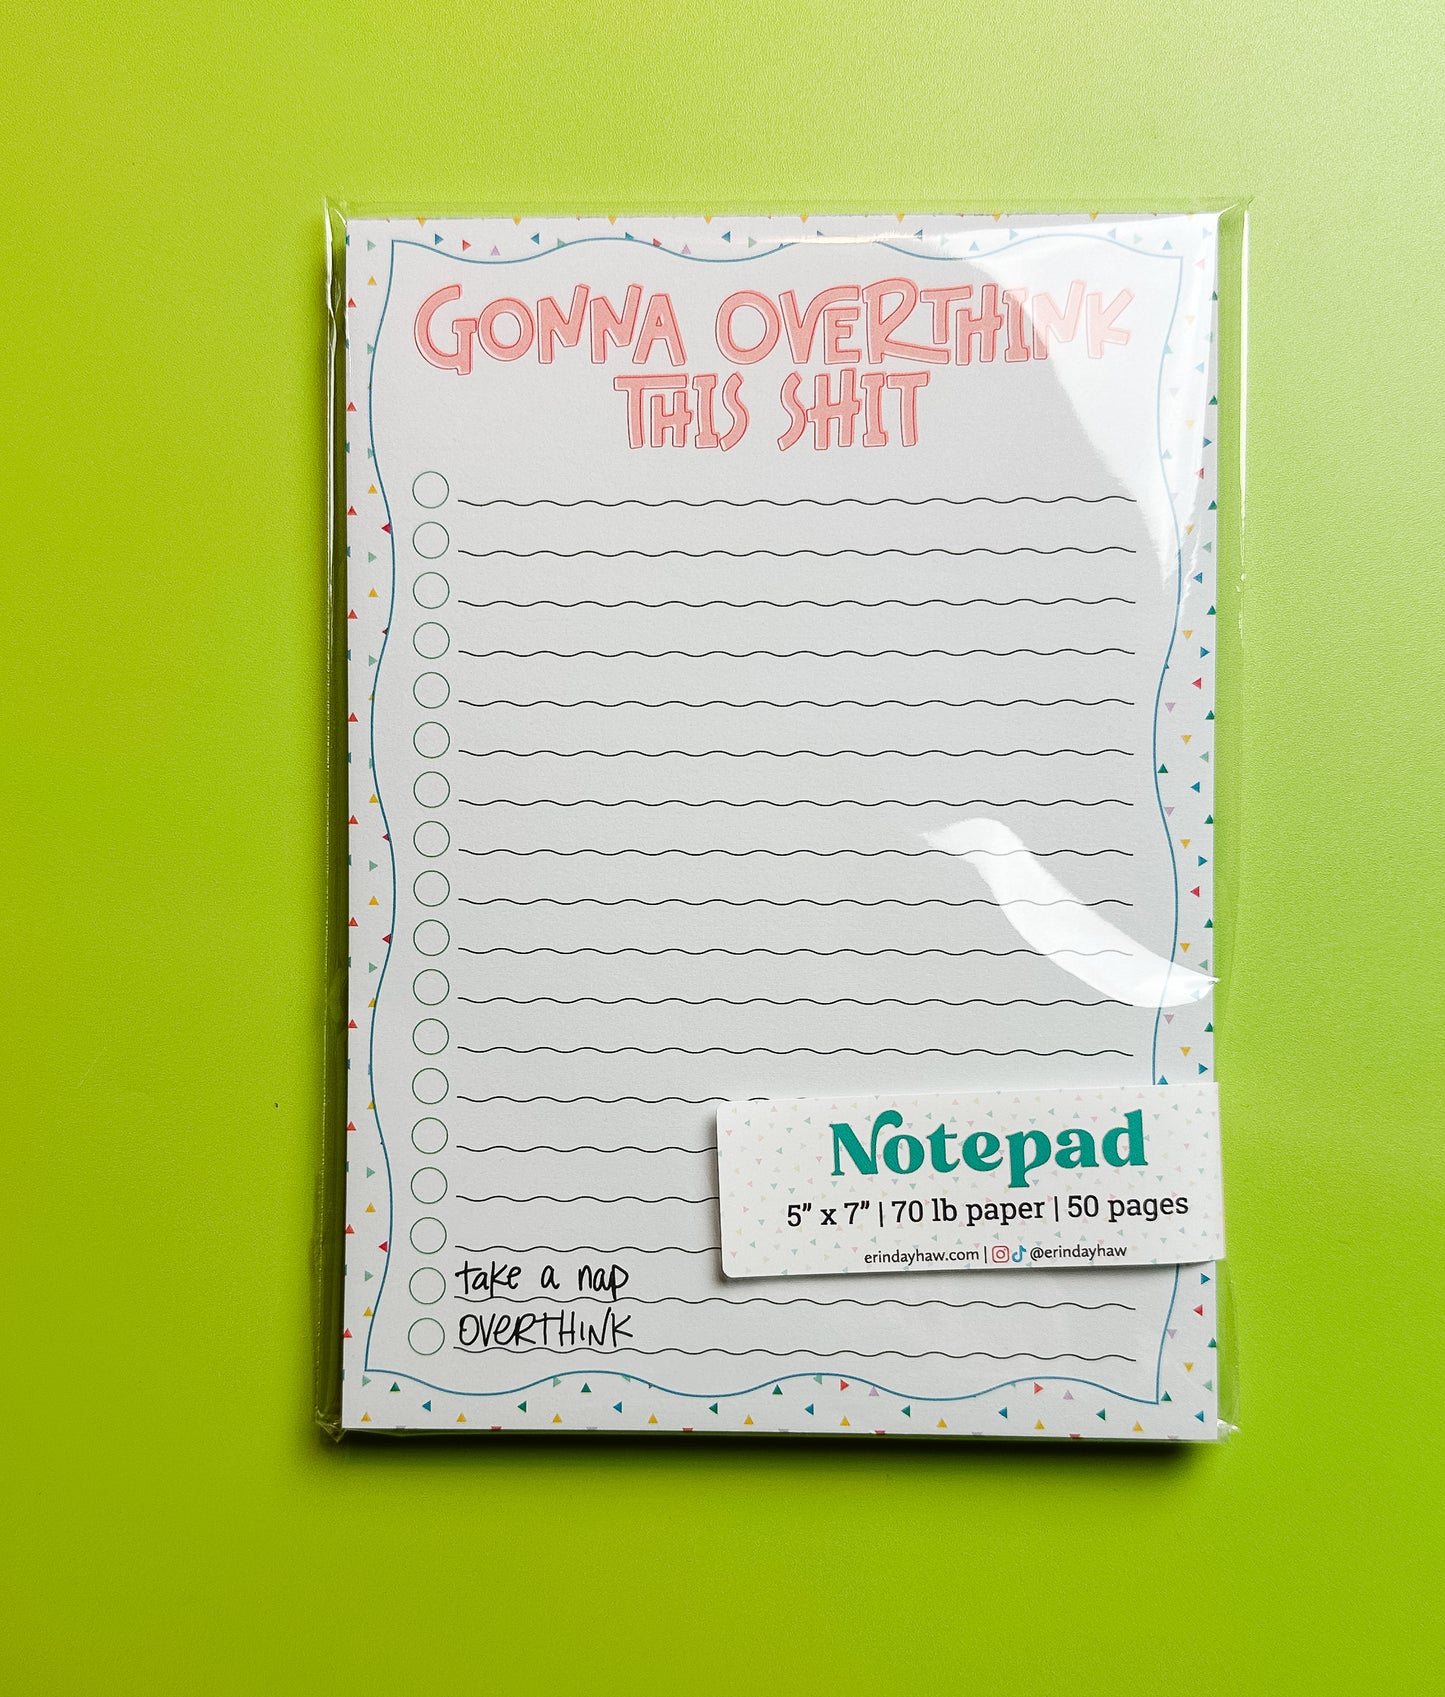 Gonna Overthink This Shit Notepad